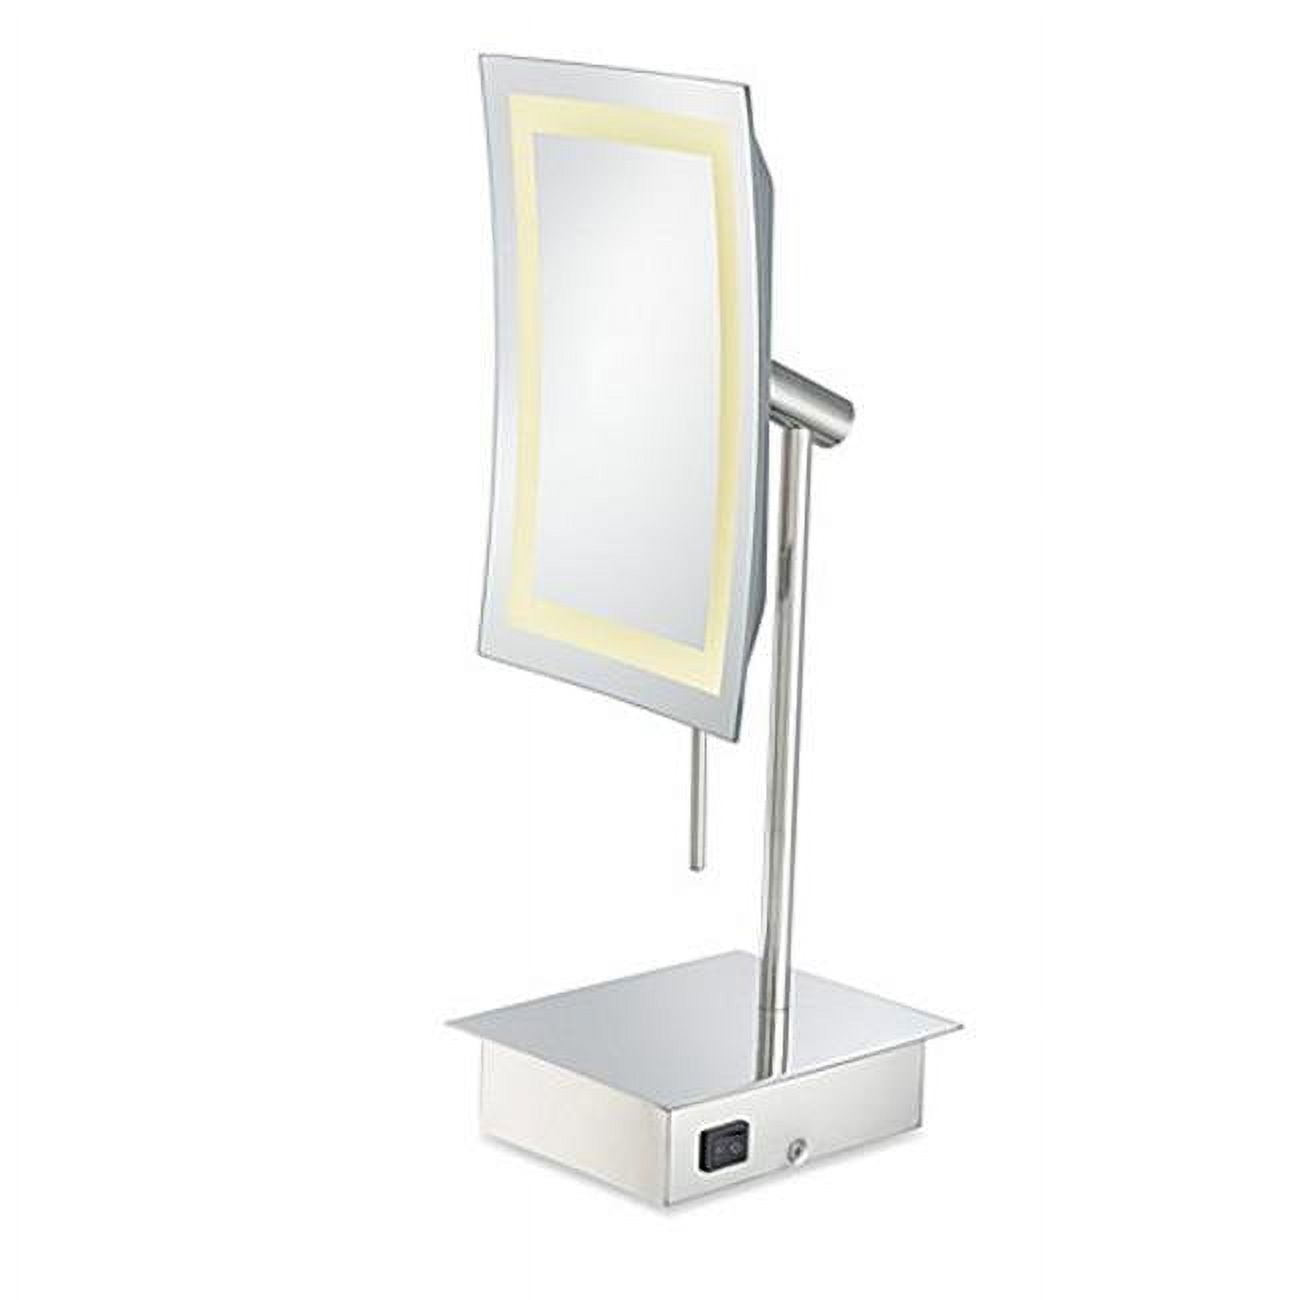 Aptations 713-35-83 Single-sided Led Square Freestanding Mirror - Rechargeable, Polished Nickel